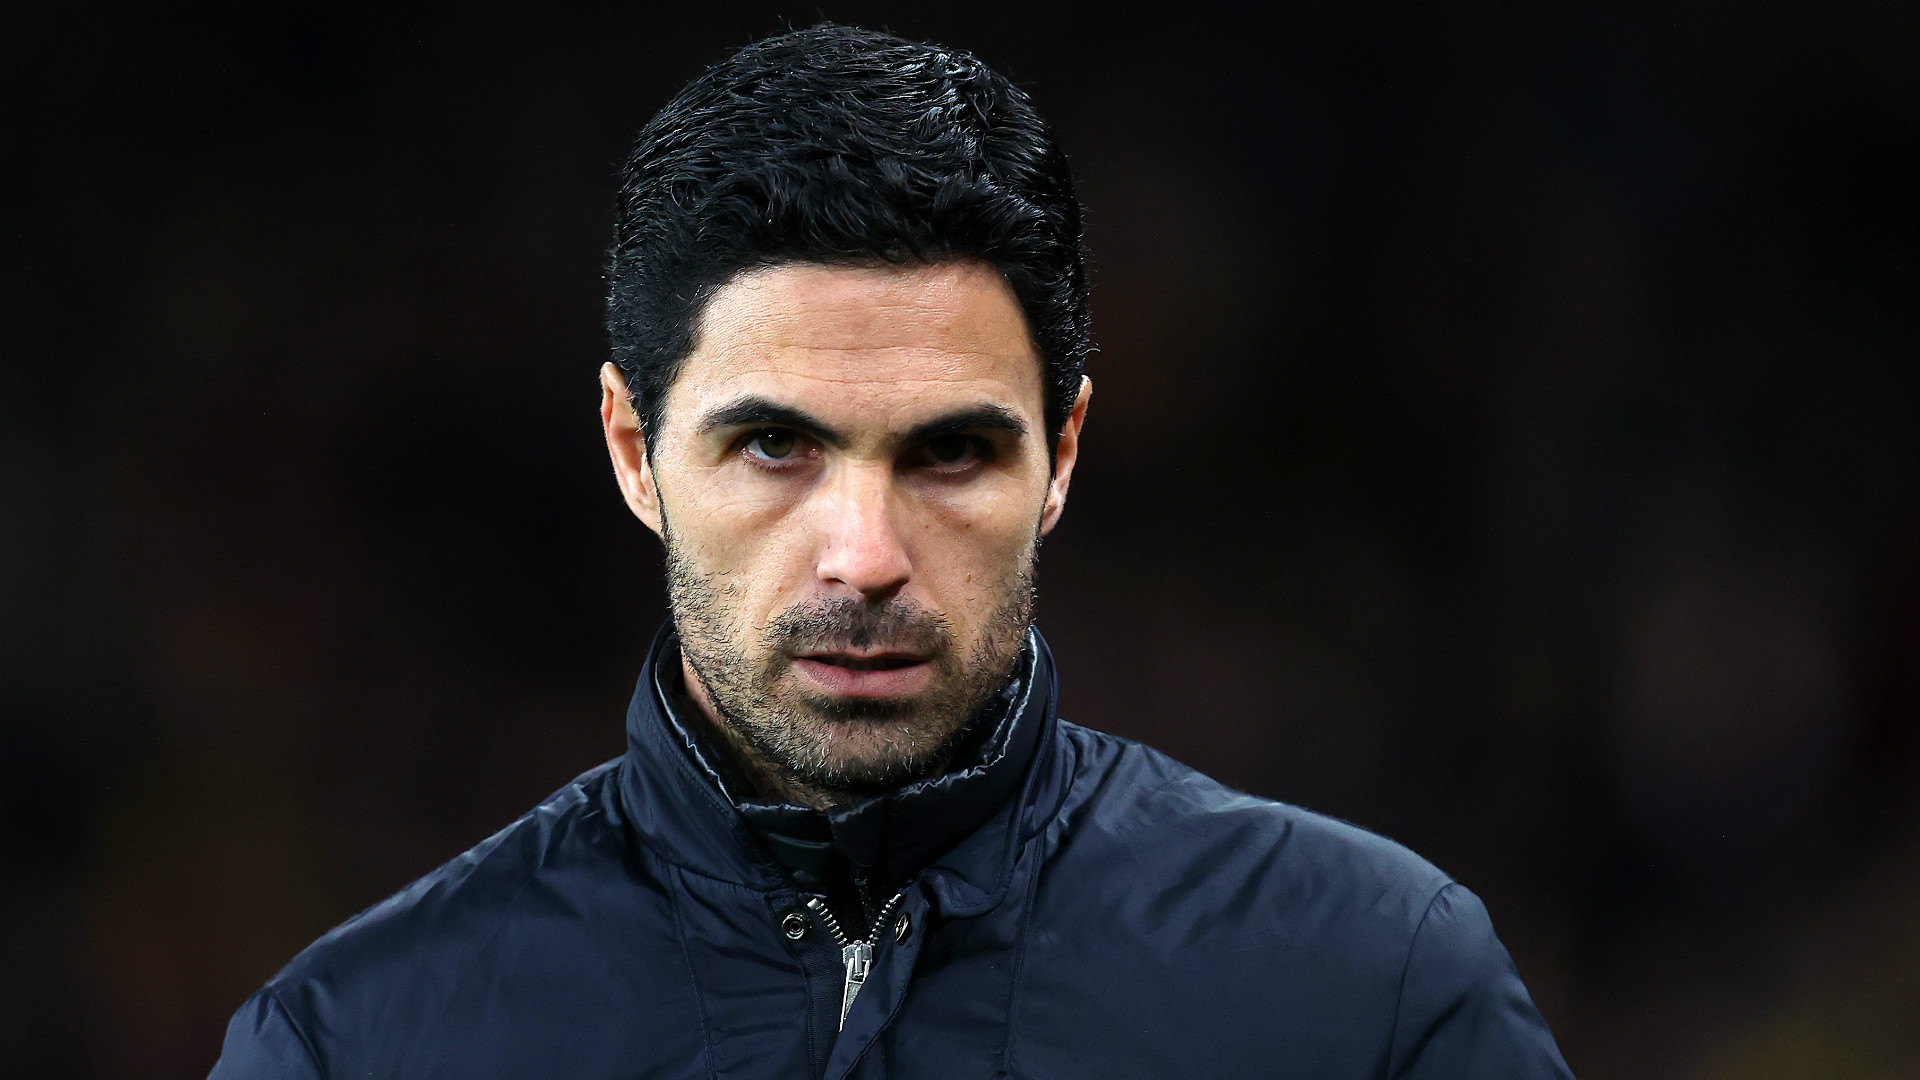 'We have a beautiful challenge ahead of us' - Arteta 'positive' that Arsenal can close gap to top sides